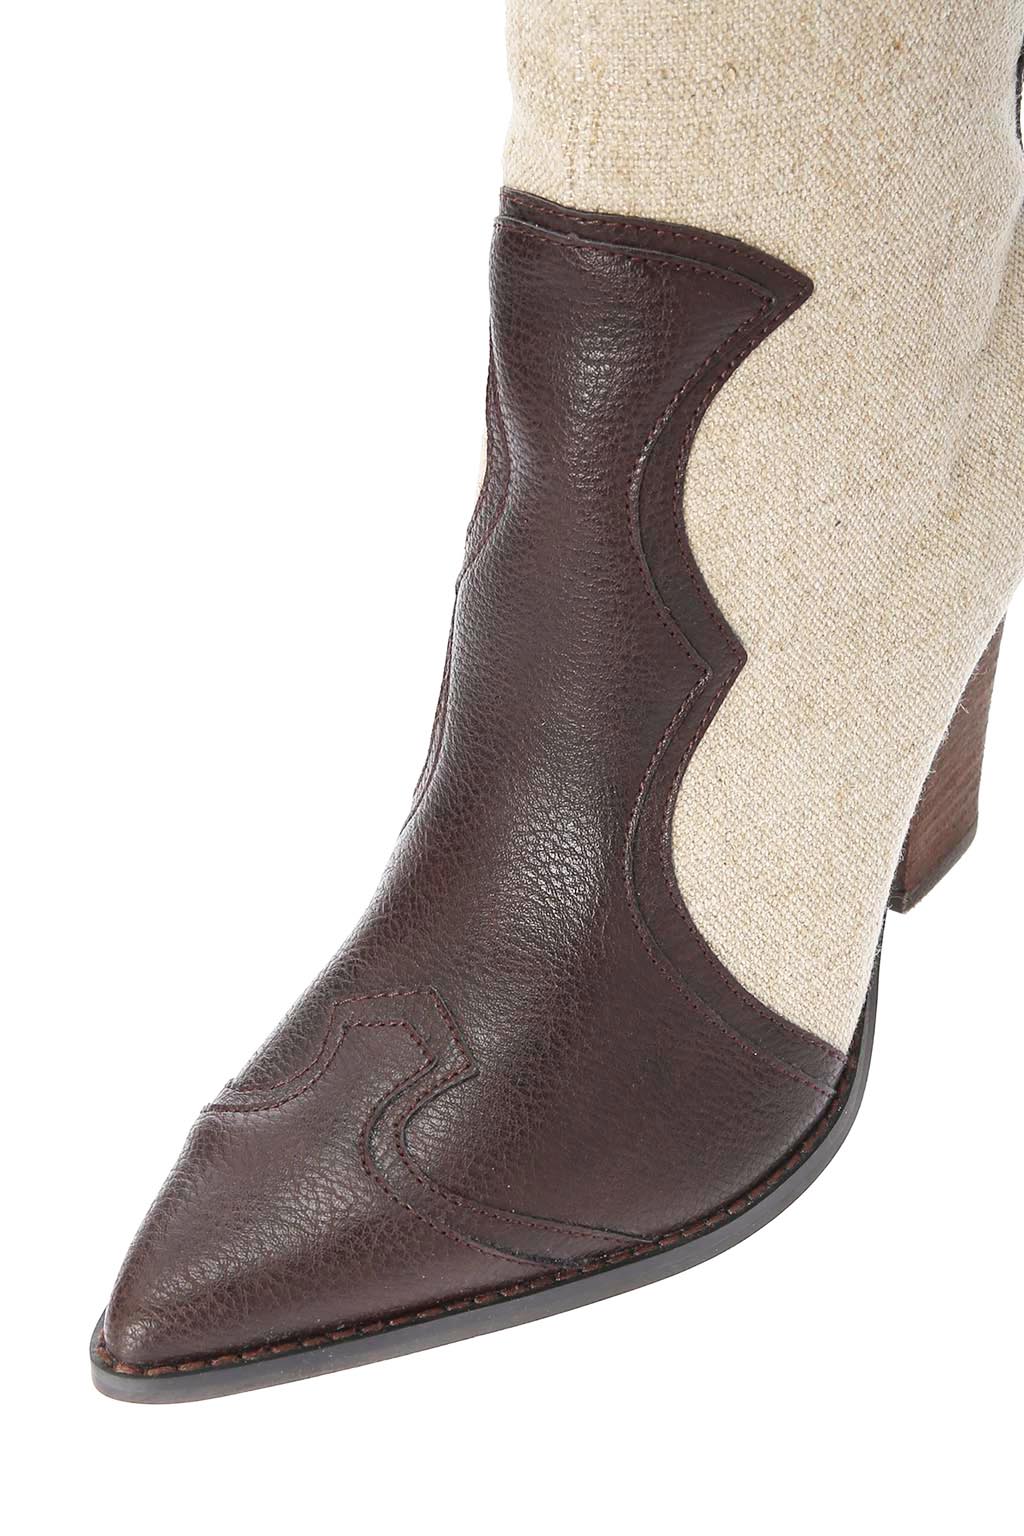 western-boots-brown-08